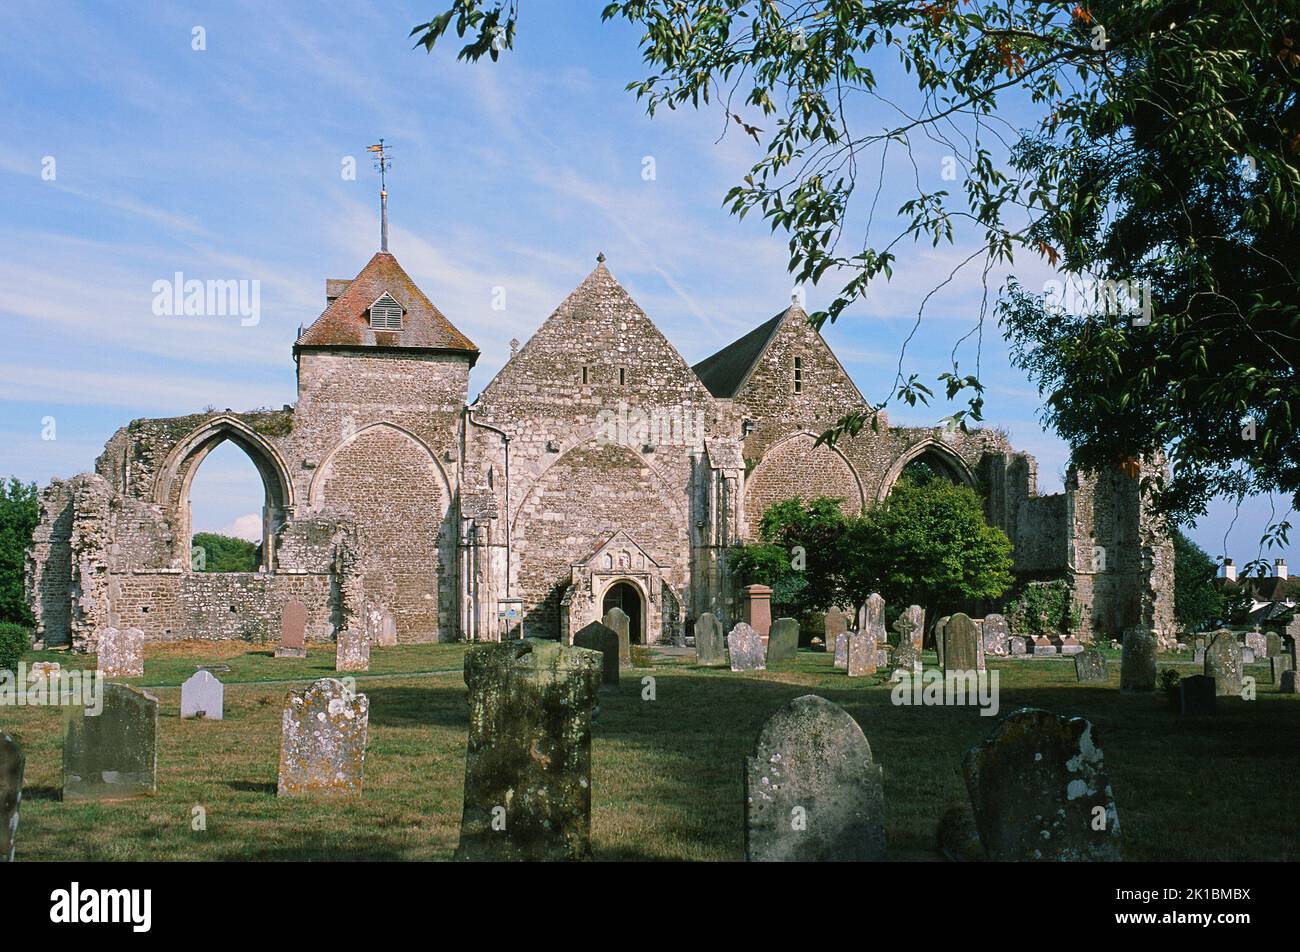 The historic church of St Thomas the Martyr in the town of Winchelsea, East Sussex, South East England Stock Photo